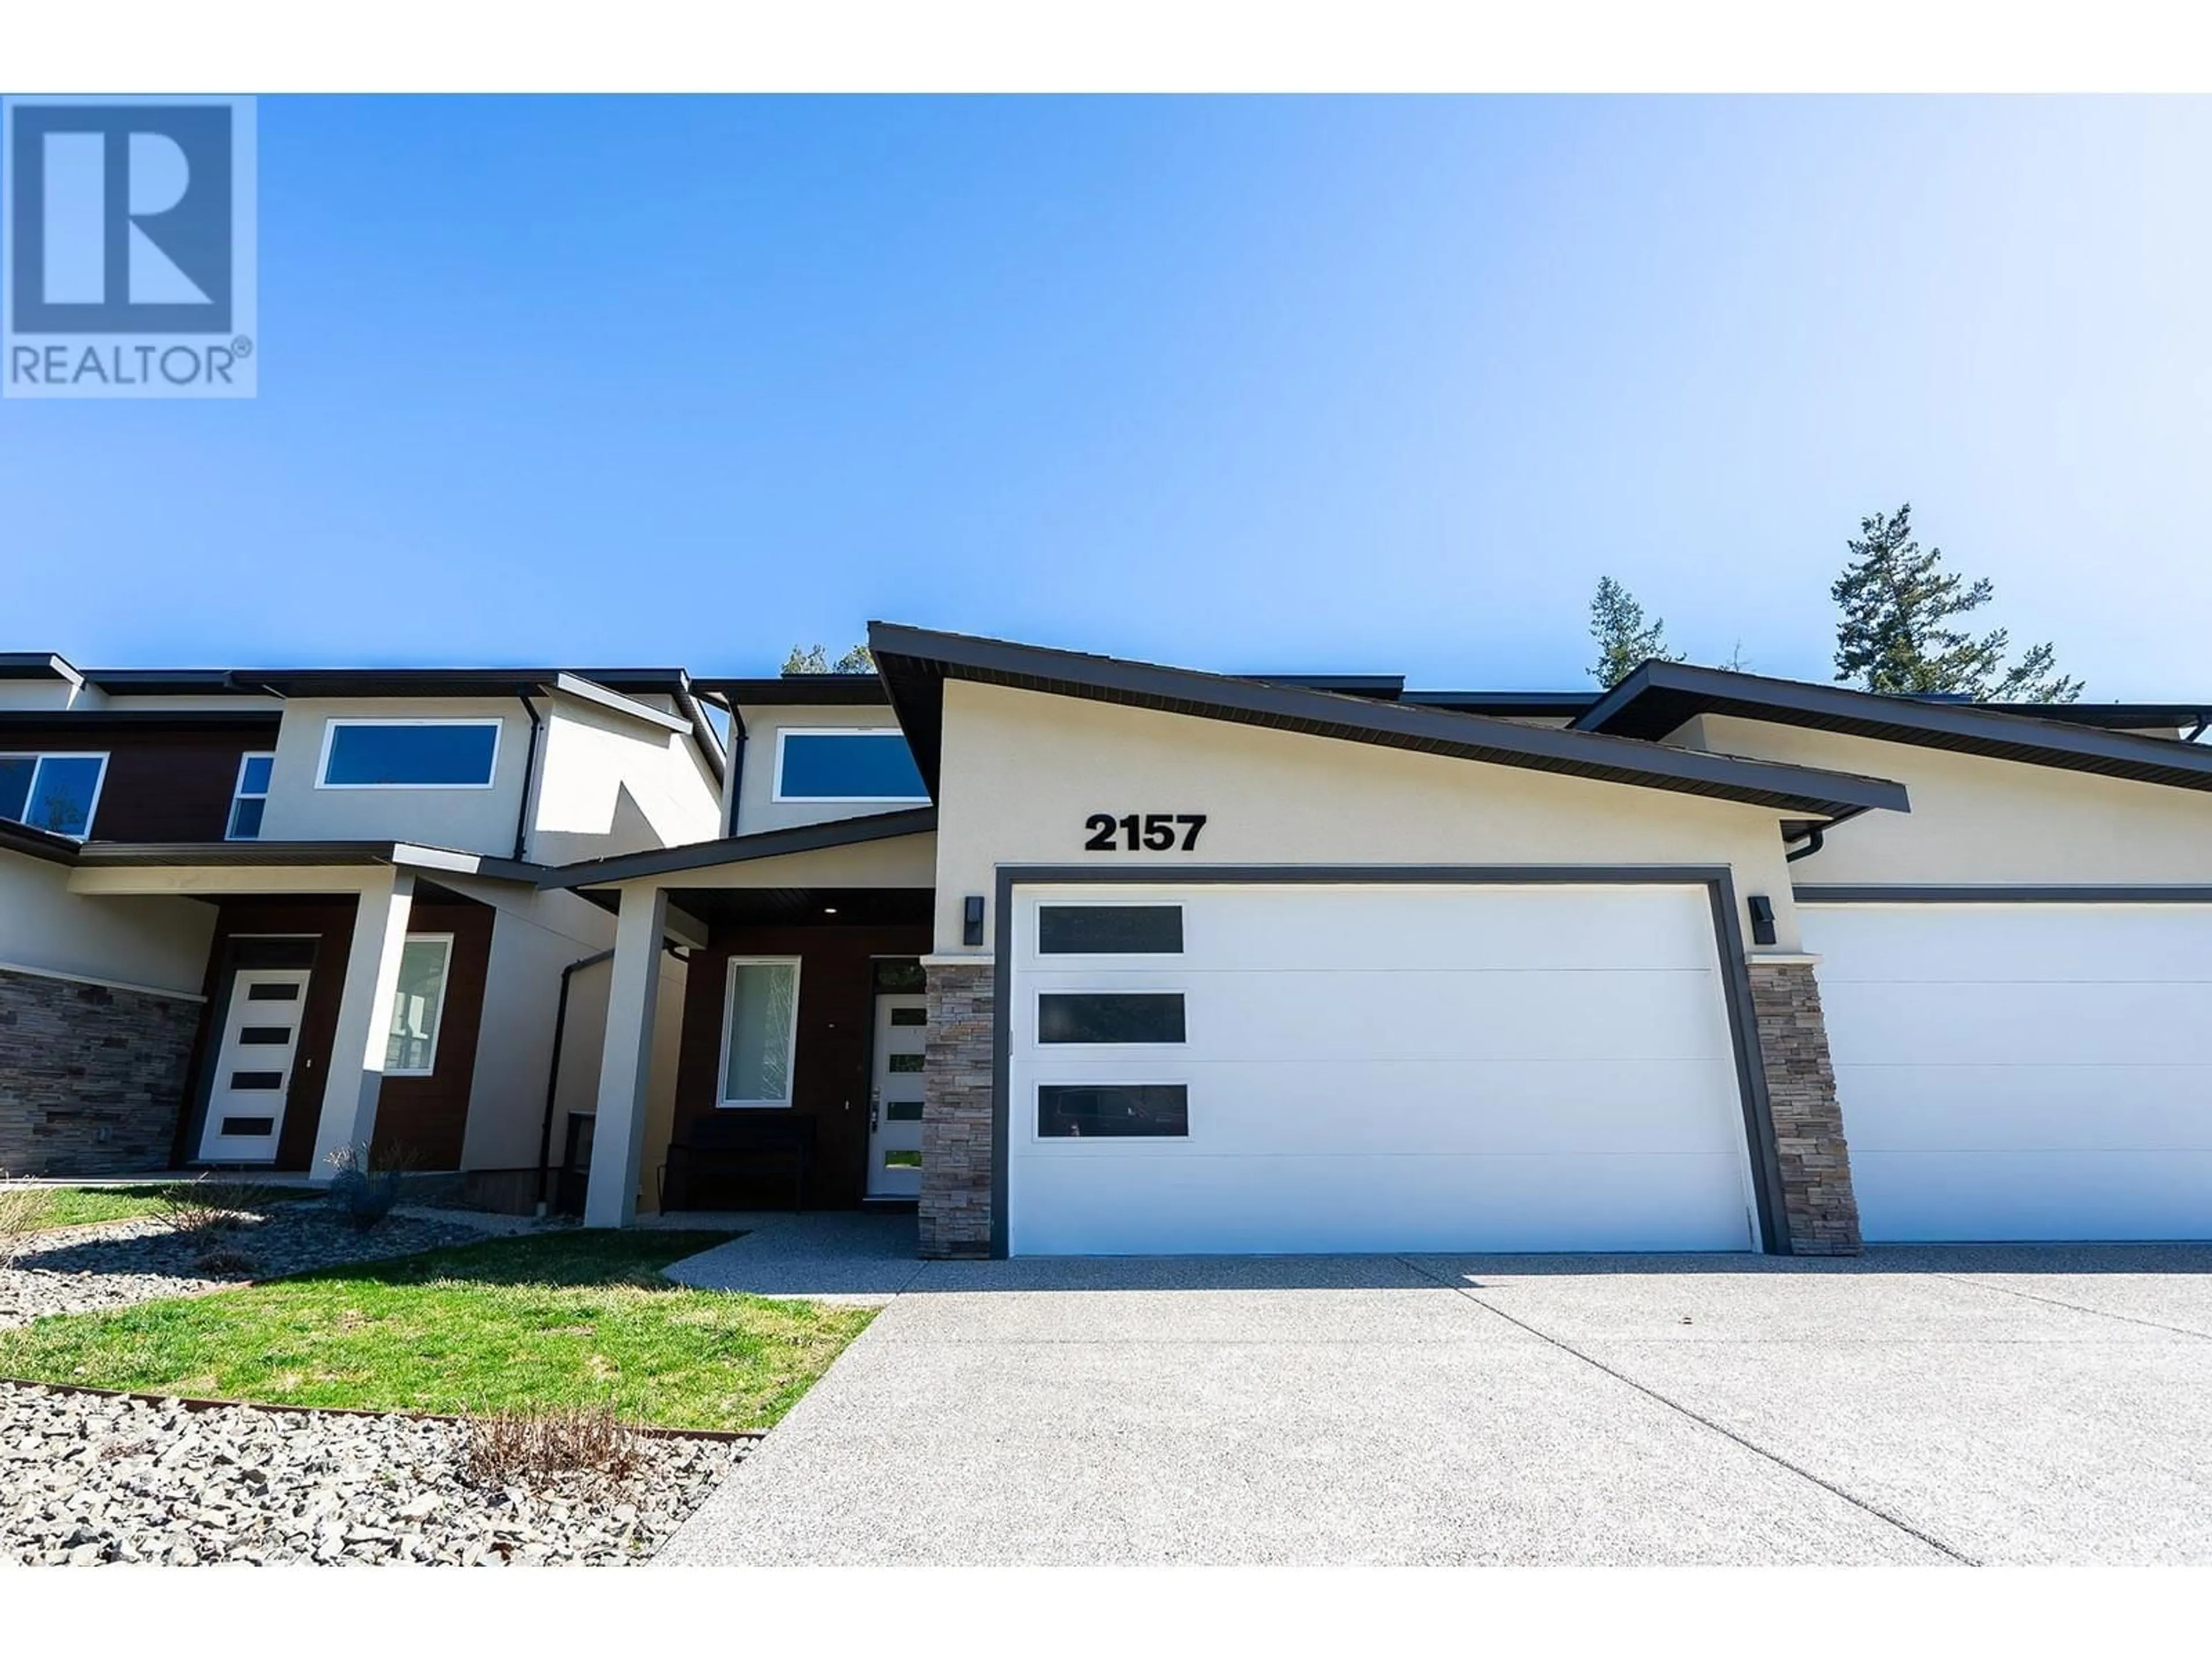 Frontside or backside of a home for 2157 McDougall Road, West Kelowna British Columbia V1Z2L6